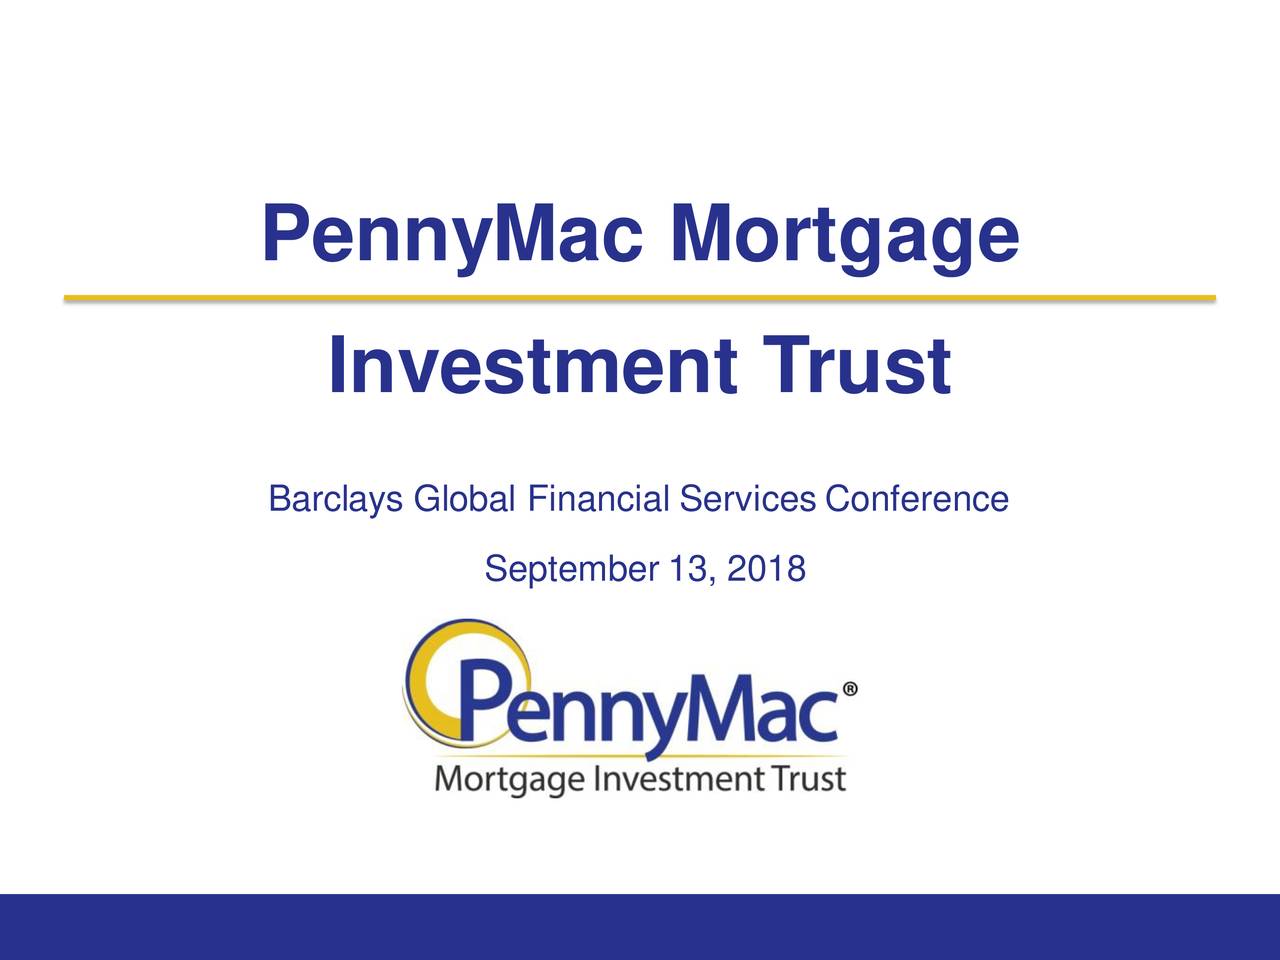 PennyMac Mortgage (PMT) Presents At Barclays Global Financial Services